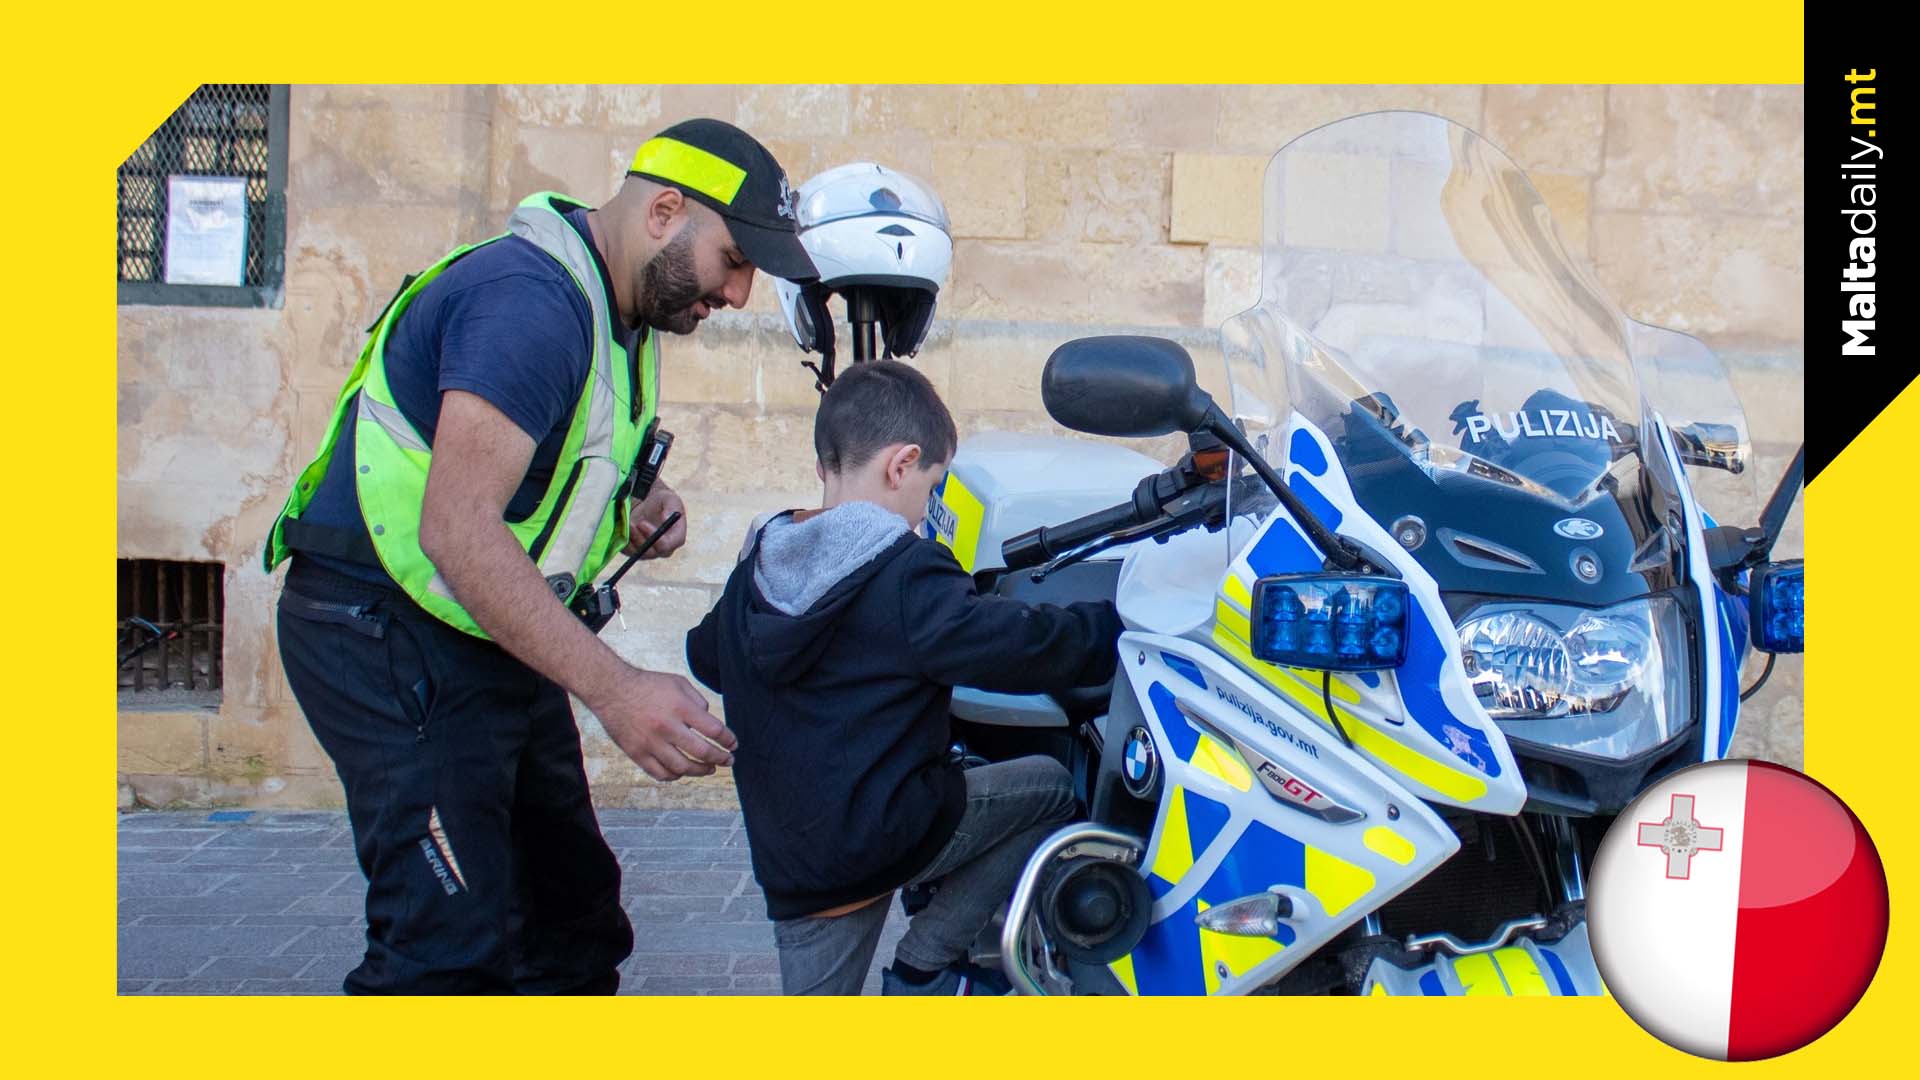 Majority of Maltese people have trust in local police force